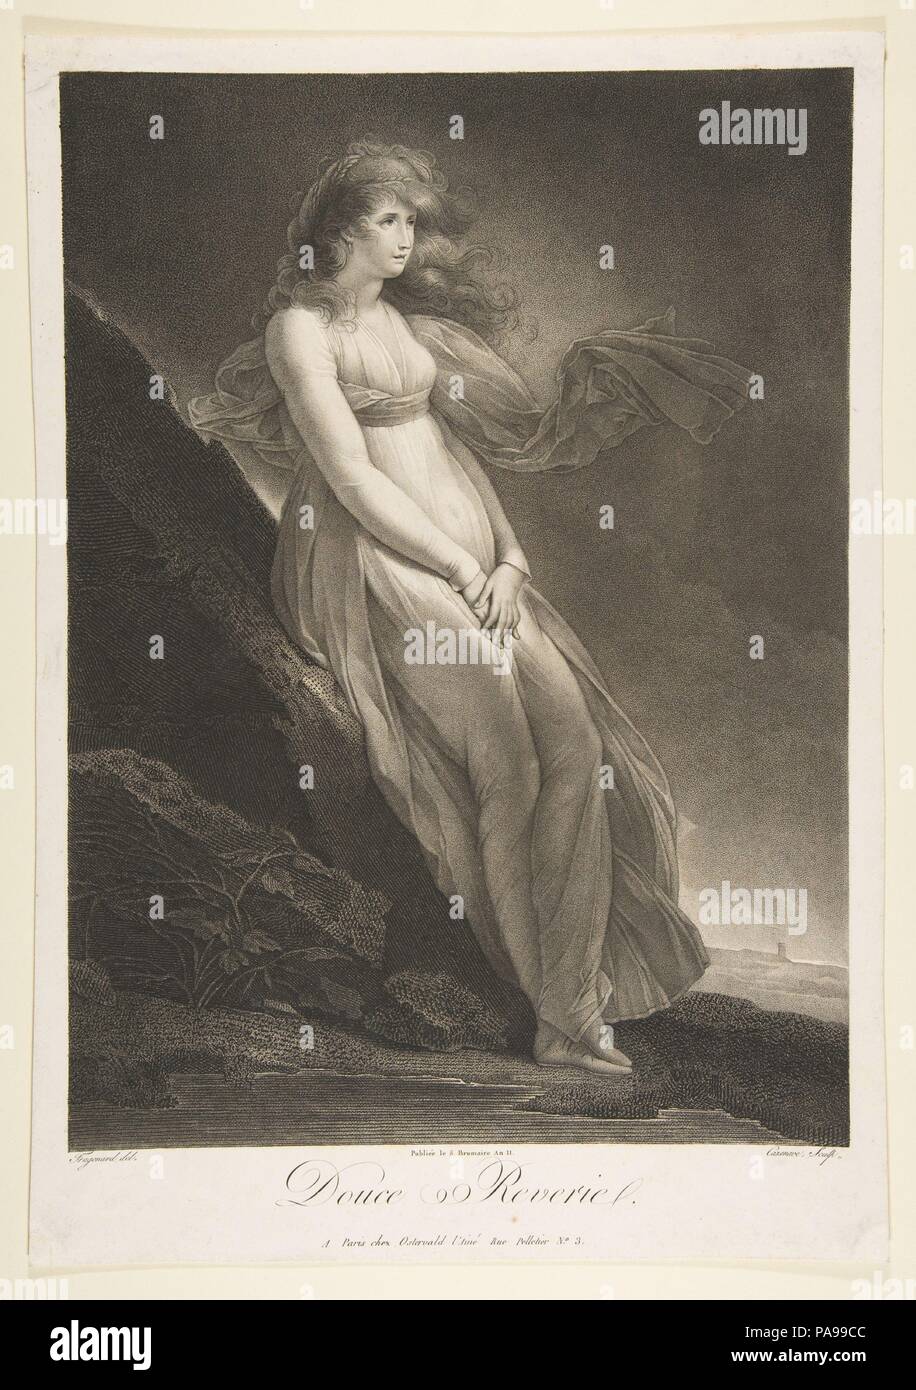 La Douce Reverie. Artist: After Alexandre Evariste Fragonard (French, Grasse 1780-1850 Paris); Engraved by Fréderic Cazenave (French, active 1793-1843). Dimensions: sheet: 17 5/16 x 12 1/8 in. (44 x 30.8 cm)  image: 16 13/16 x 11 1/8 in. (42.7 x 28.3 cm). Date: 1793-1843. Museum: Metropolitan Museum of Art, New York, USA. Stock Photo